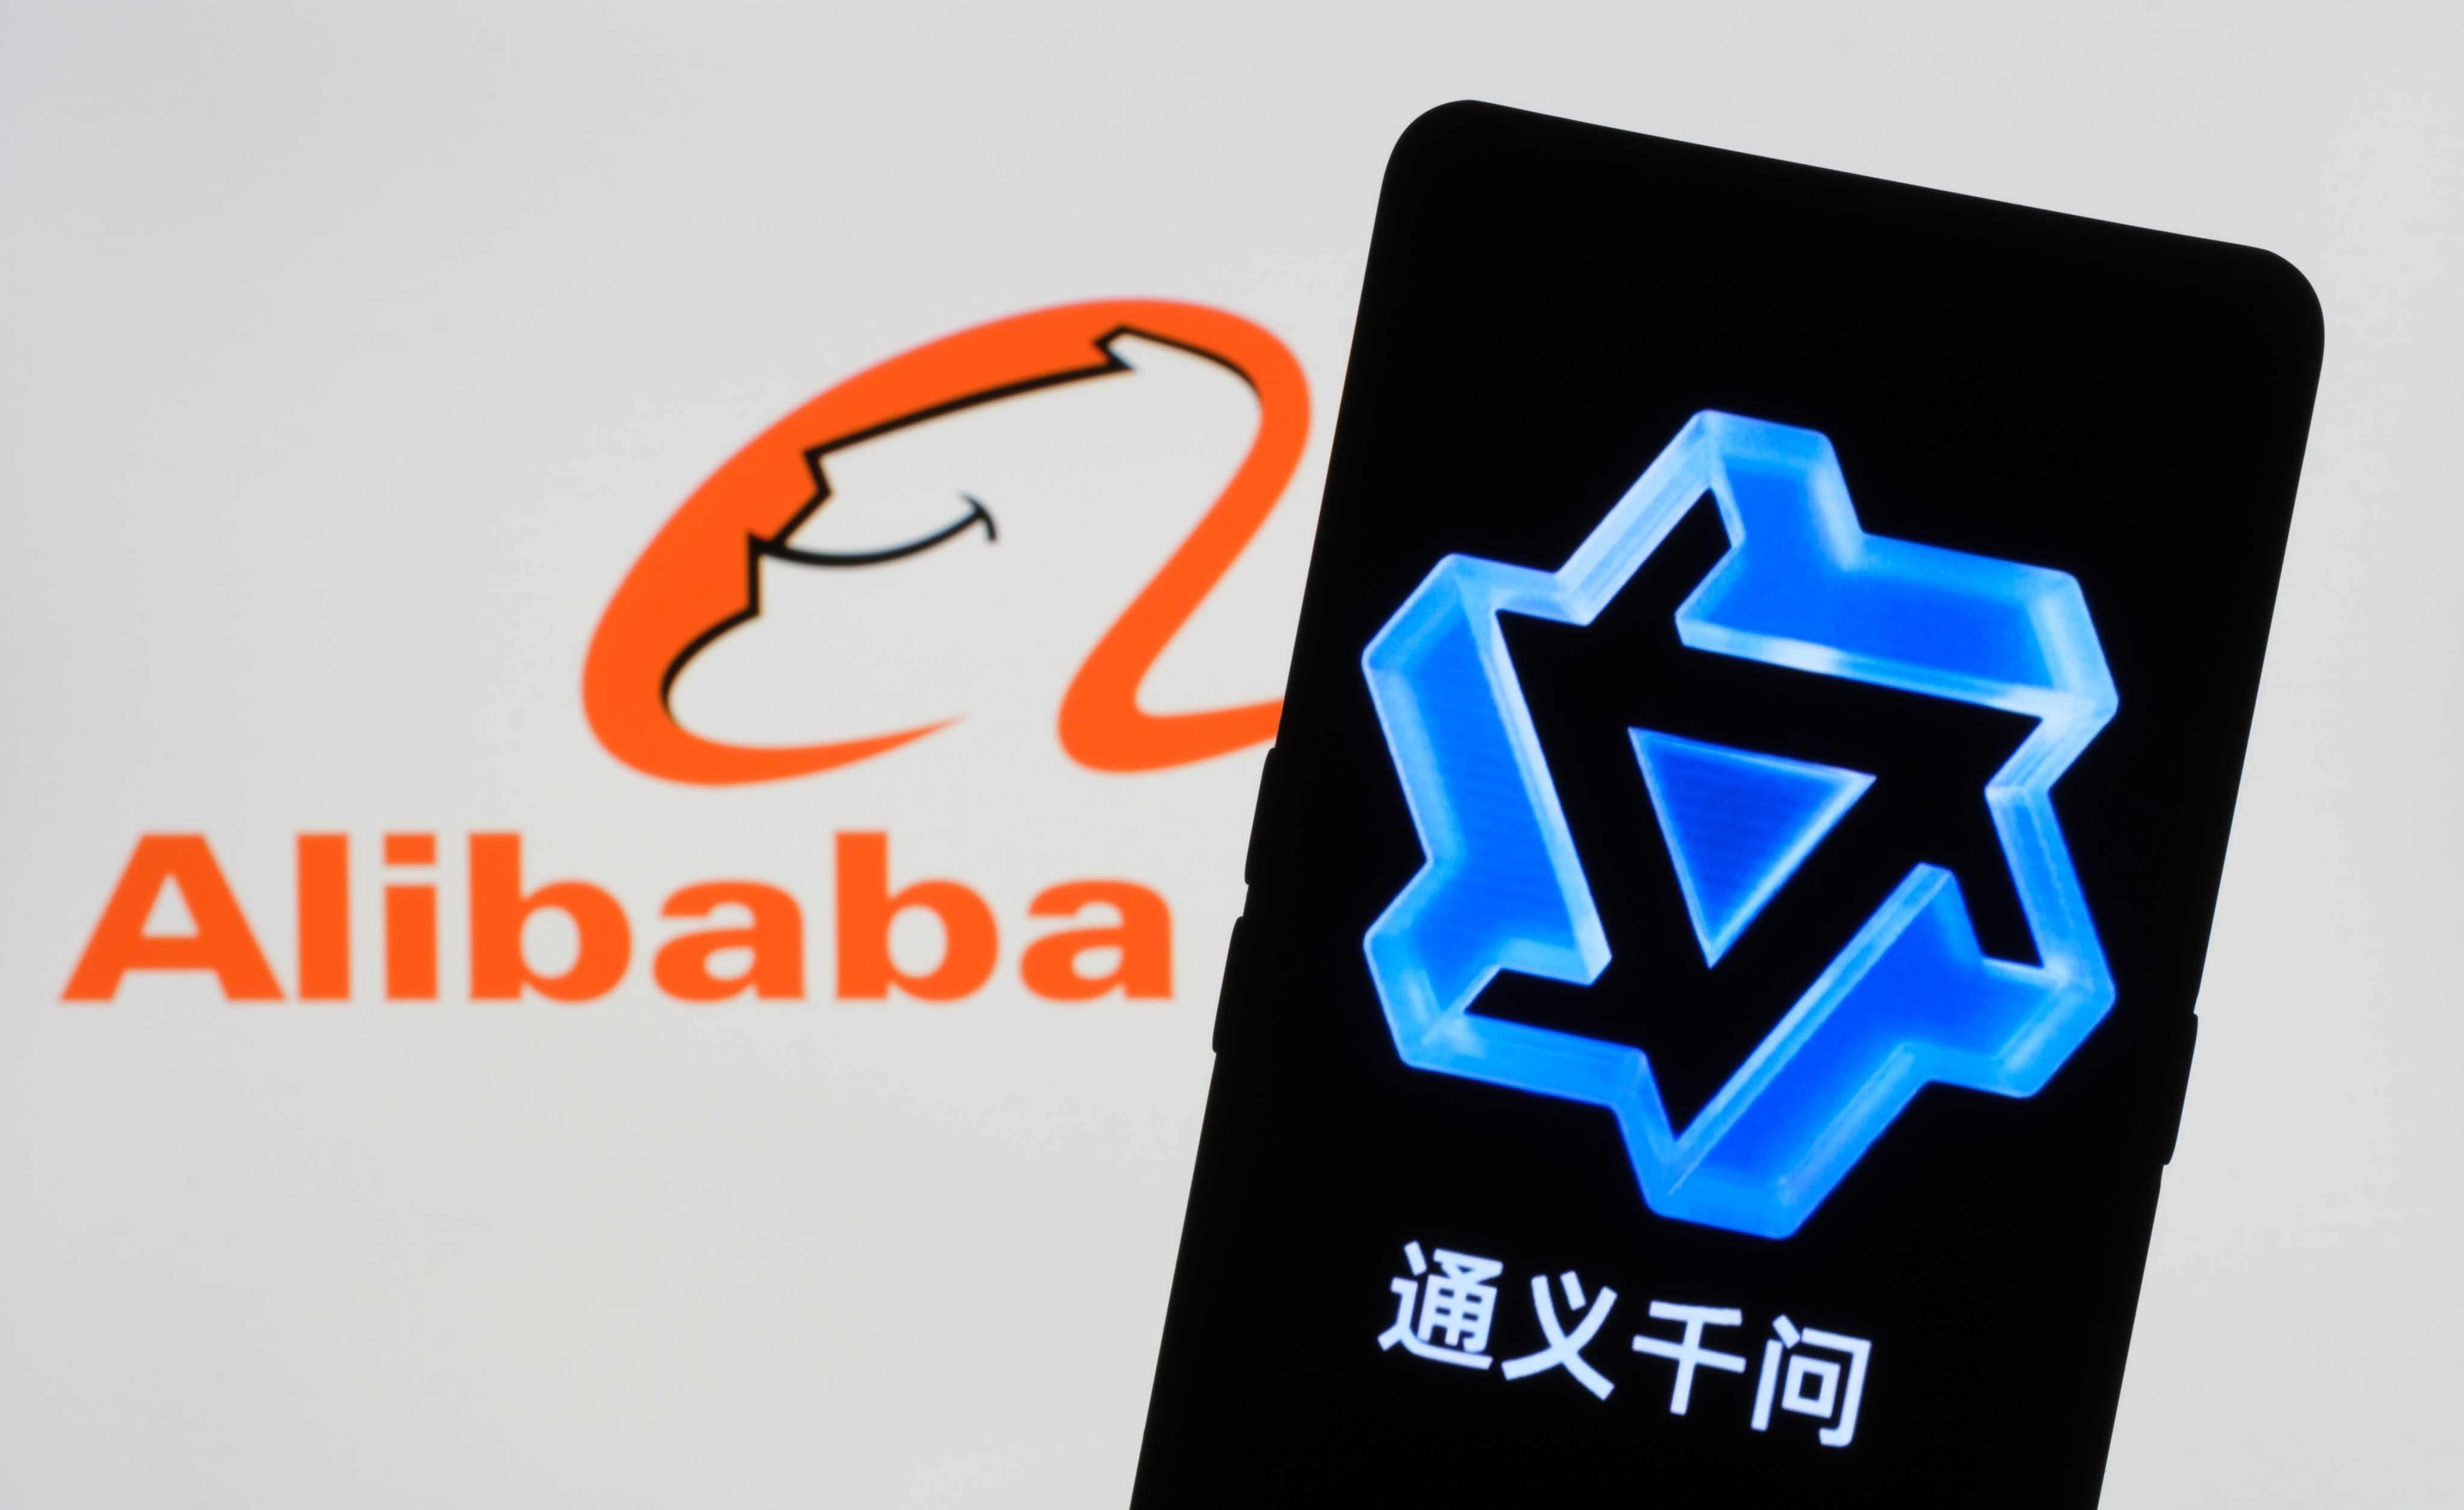 Alibaba’s Tongyi Qianwen large language model is now powering an AI programmer meant to help software developers. Photo: Shutterstock